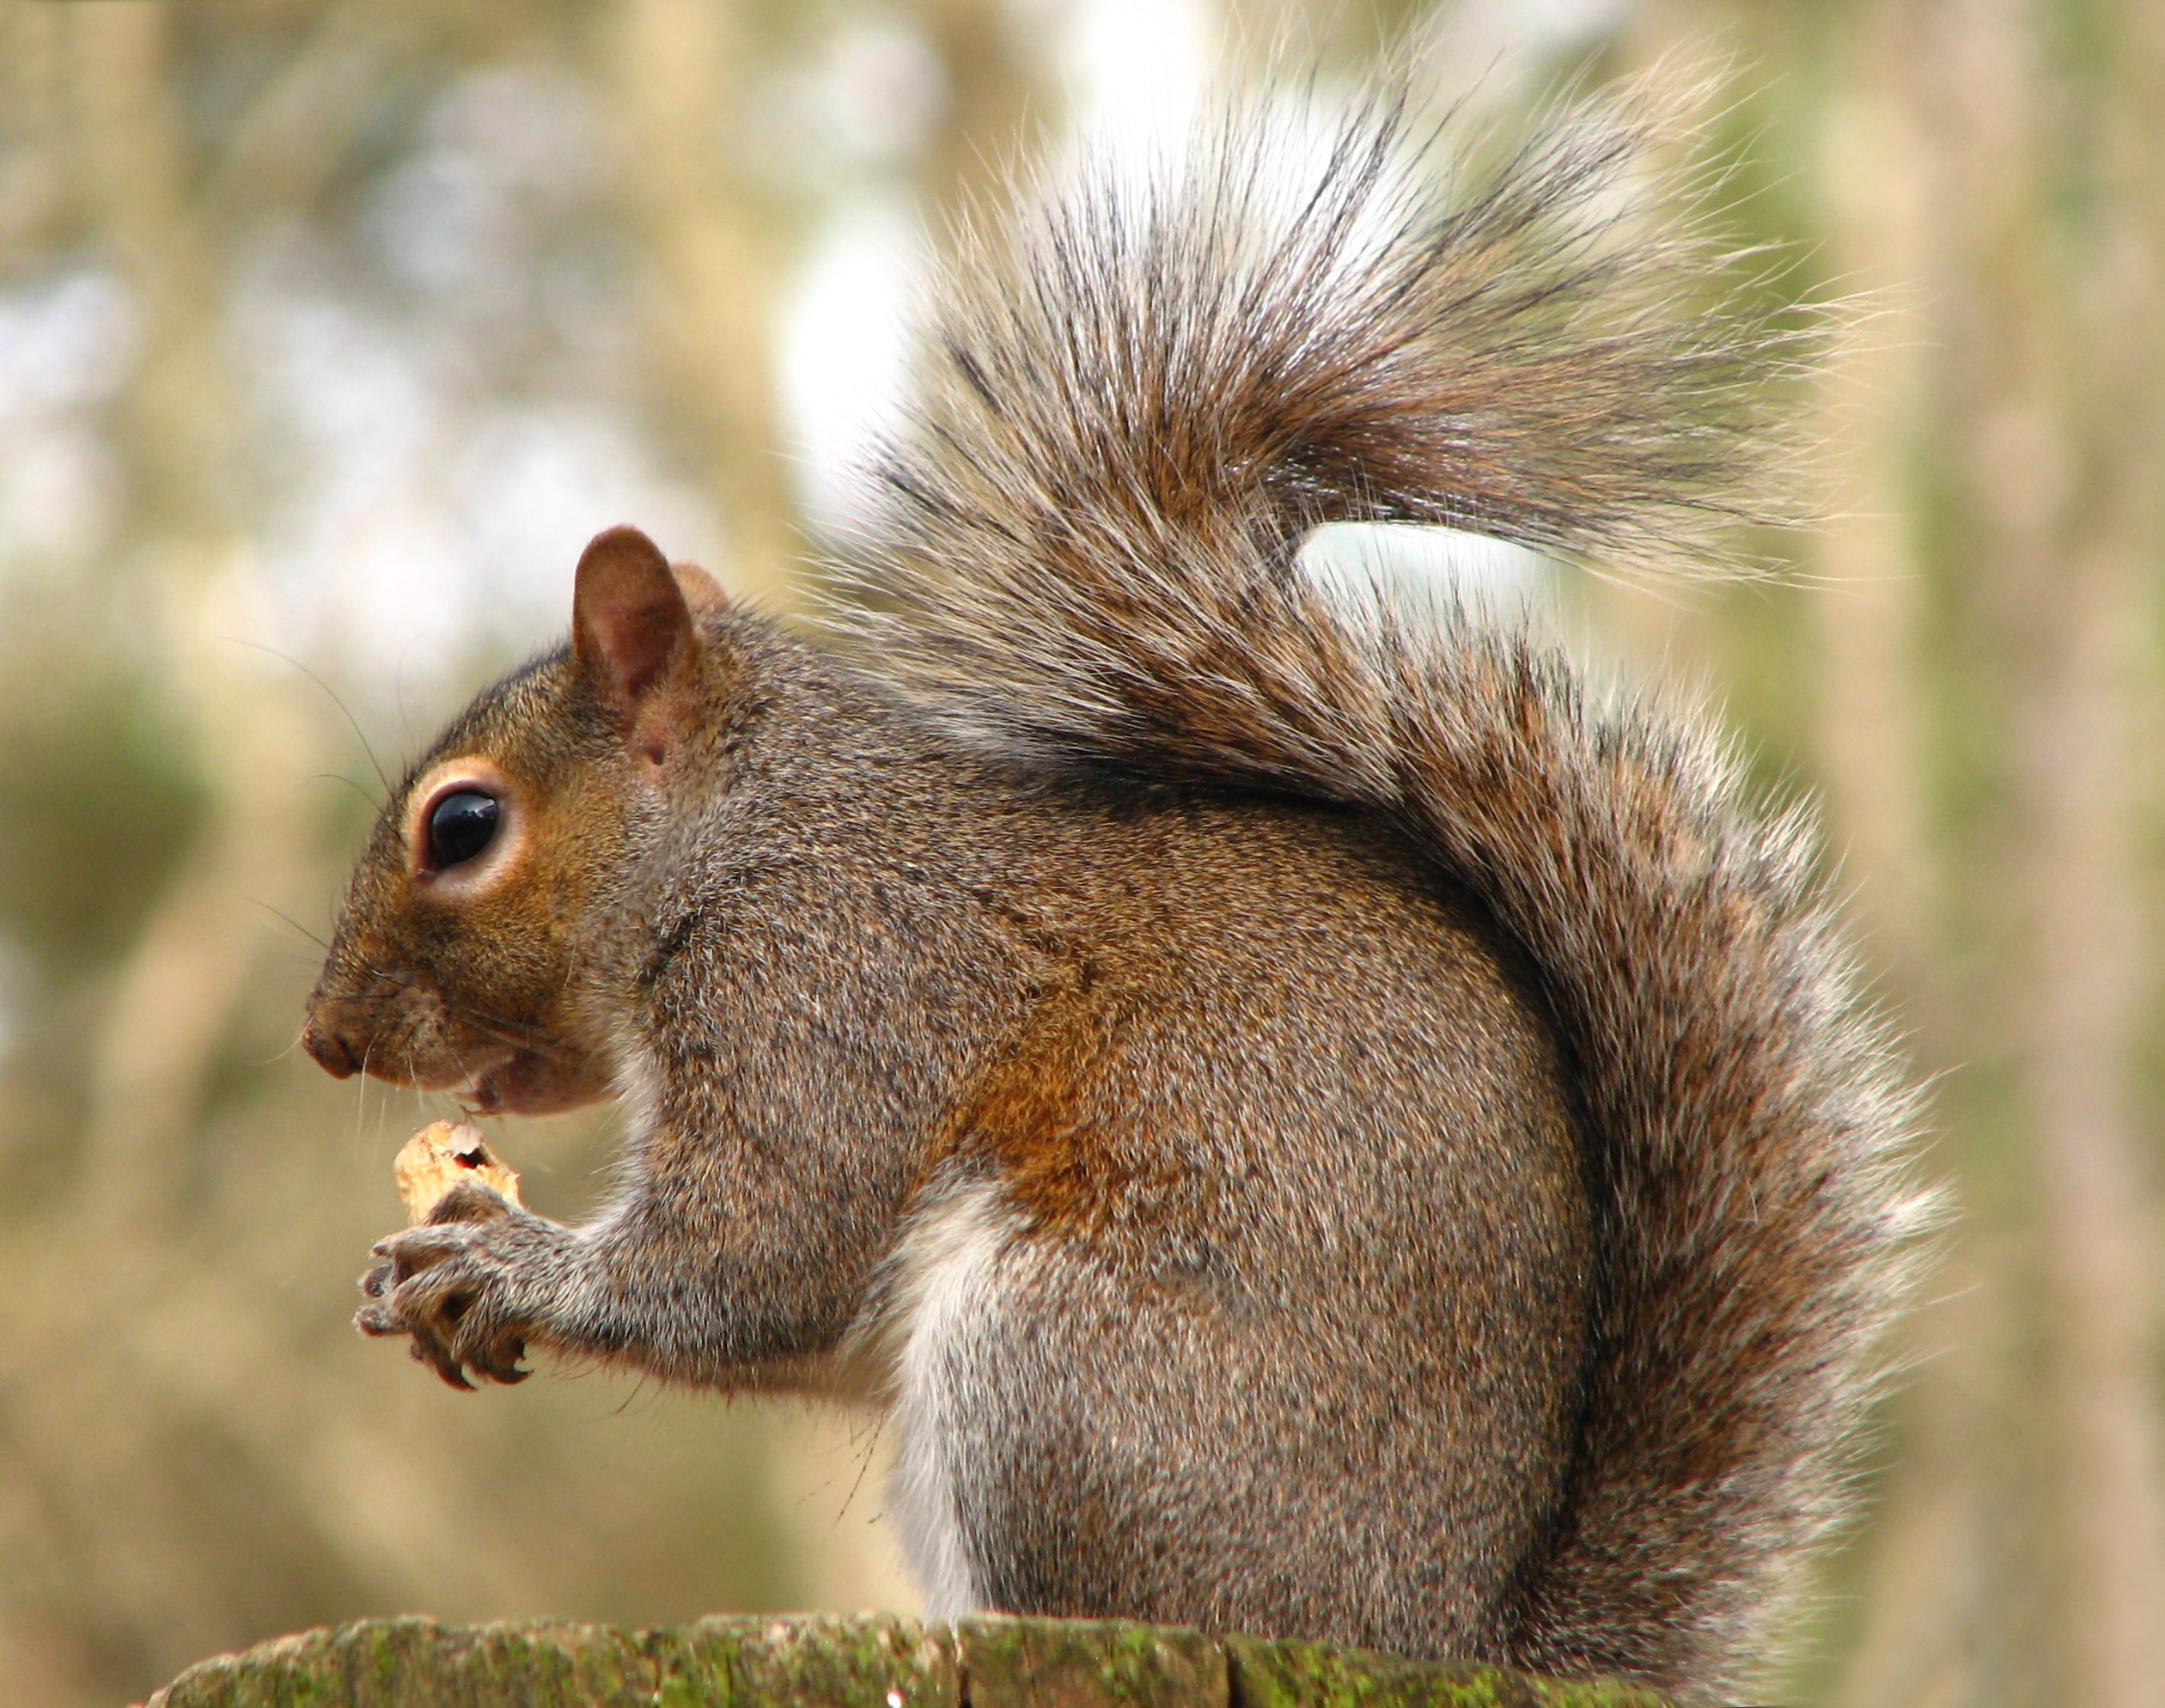 Close-up of a squirrel eating a nut photo